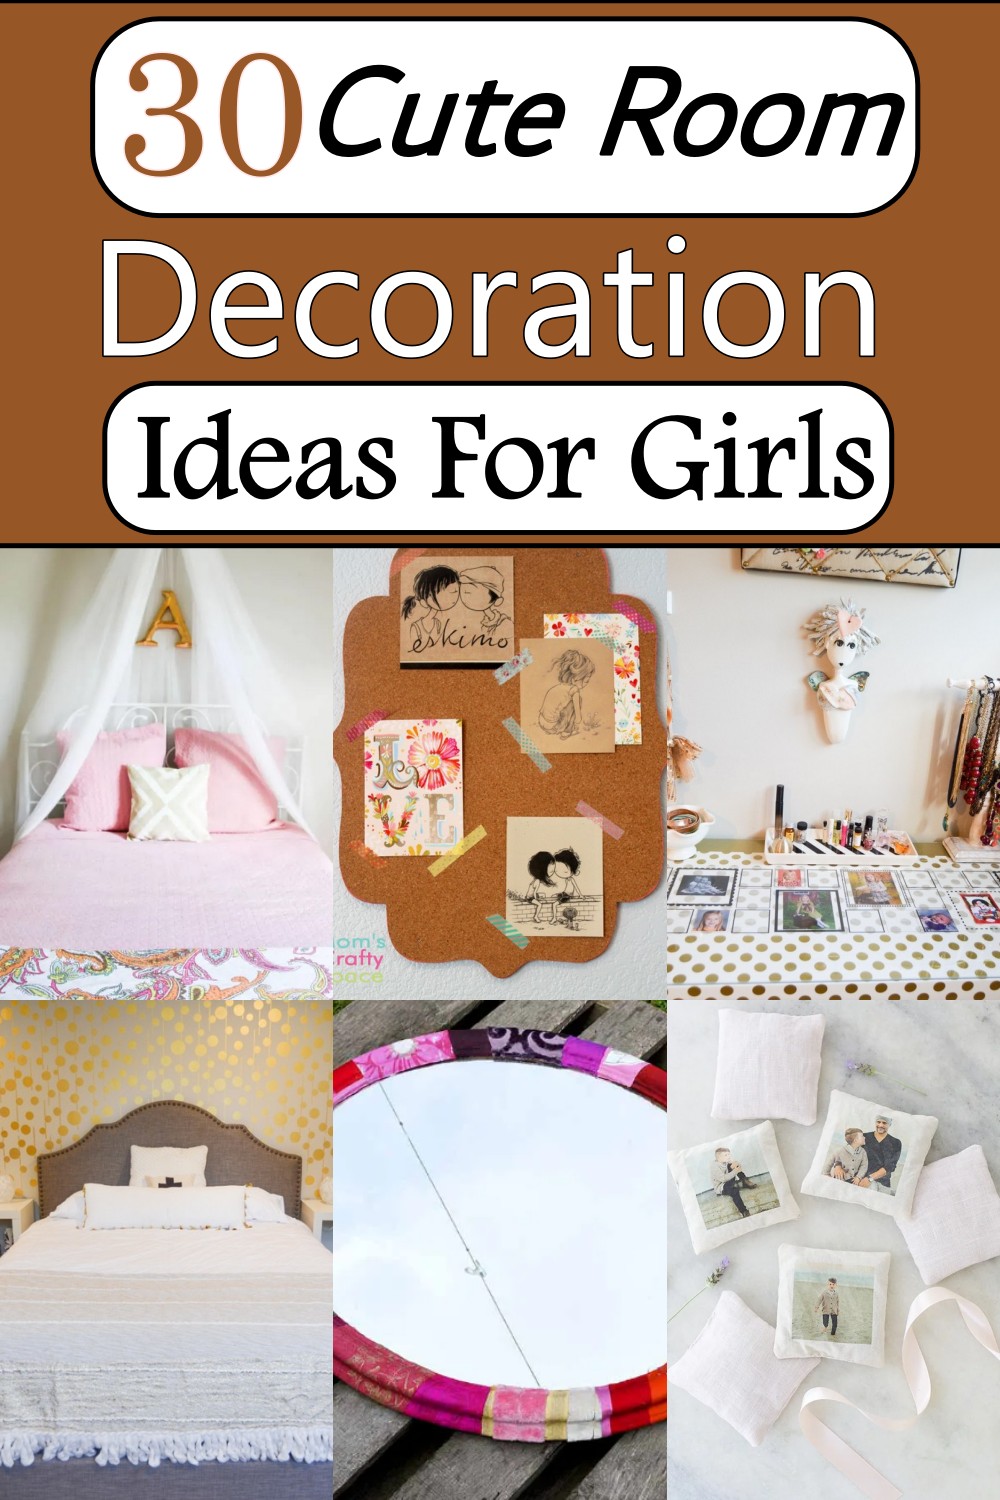 Cute Room Decoration Ideas For Girls 1